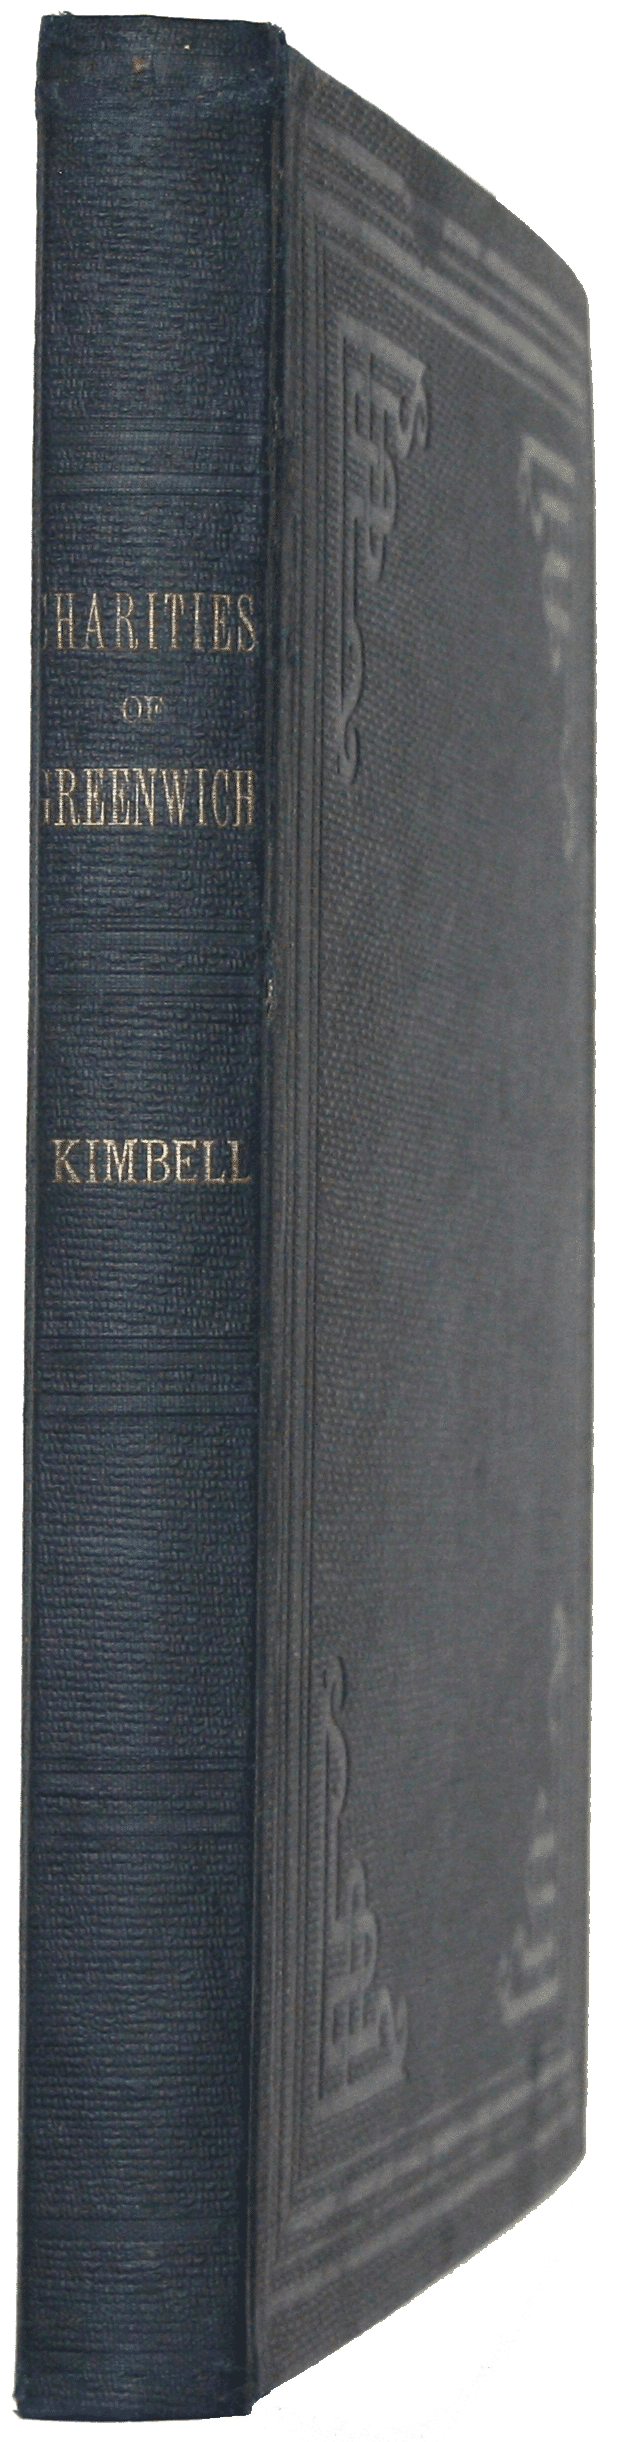 Kimball’s Account of the Charitable Funds of St Alphege Greenwich